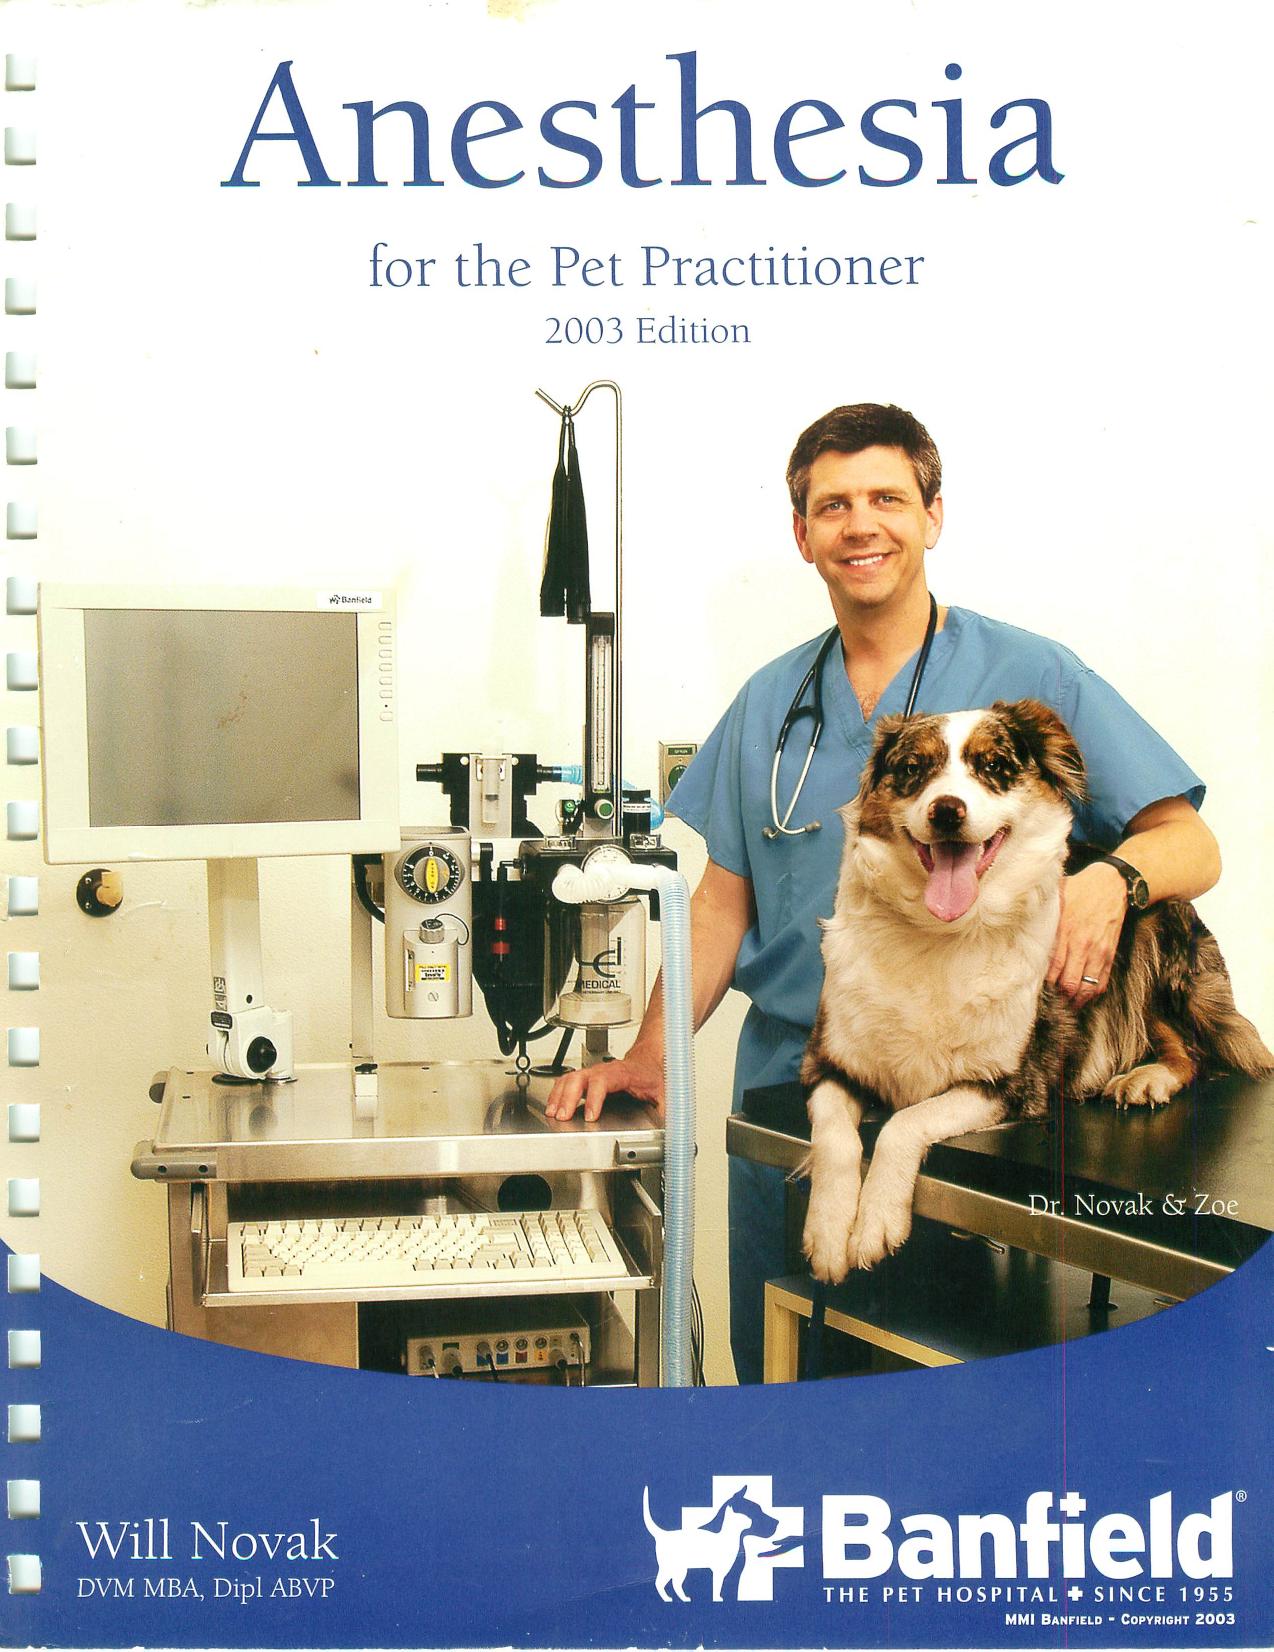 Anesthesia for the Pet Practitioner 2003